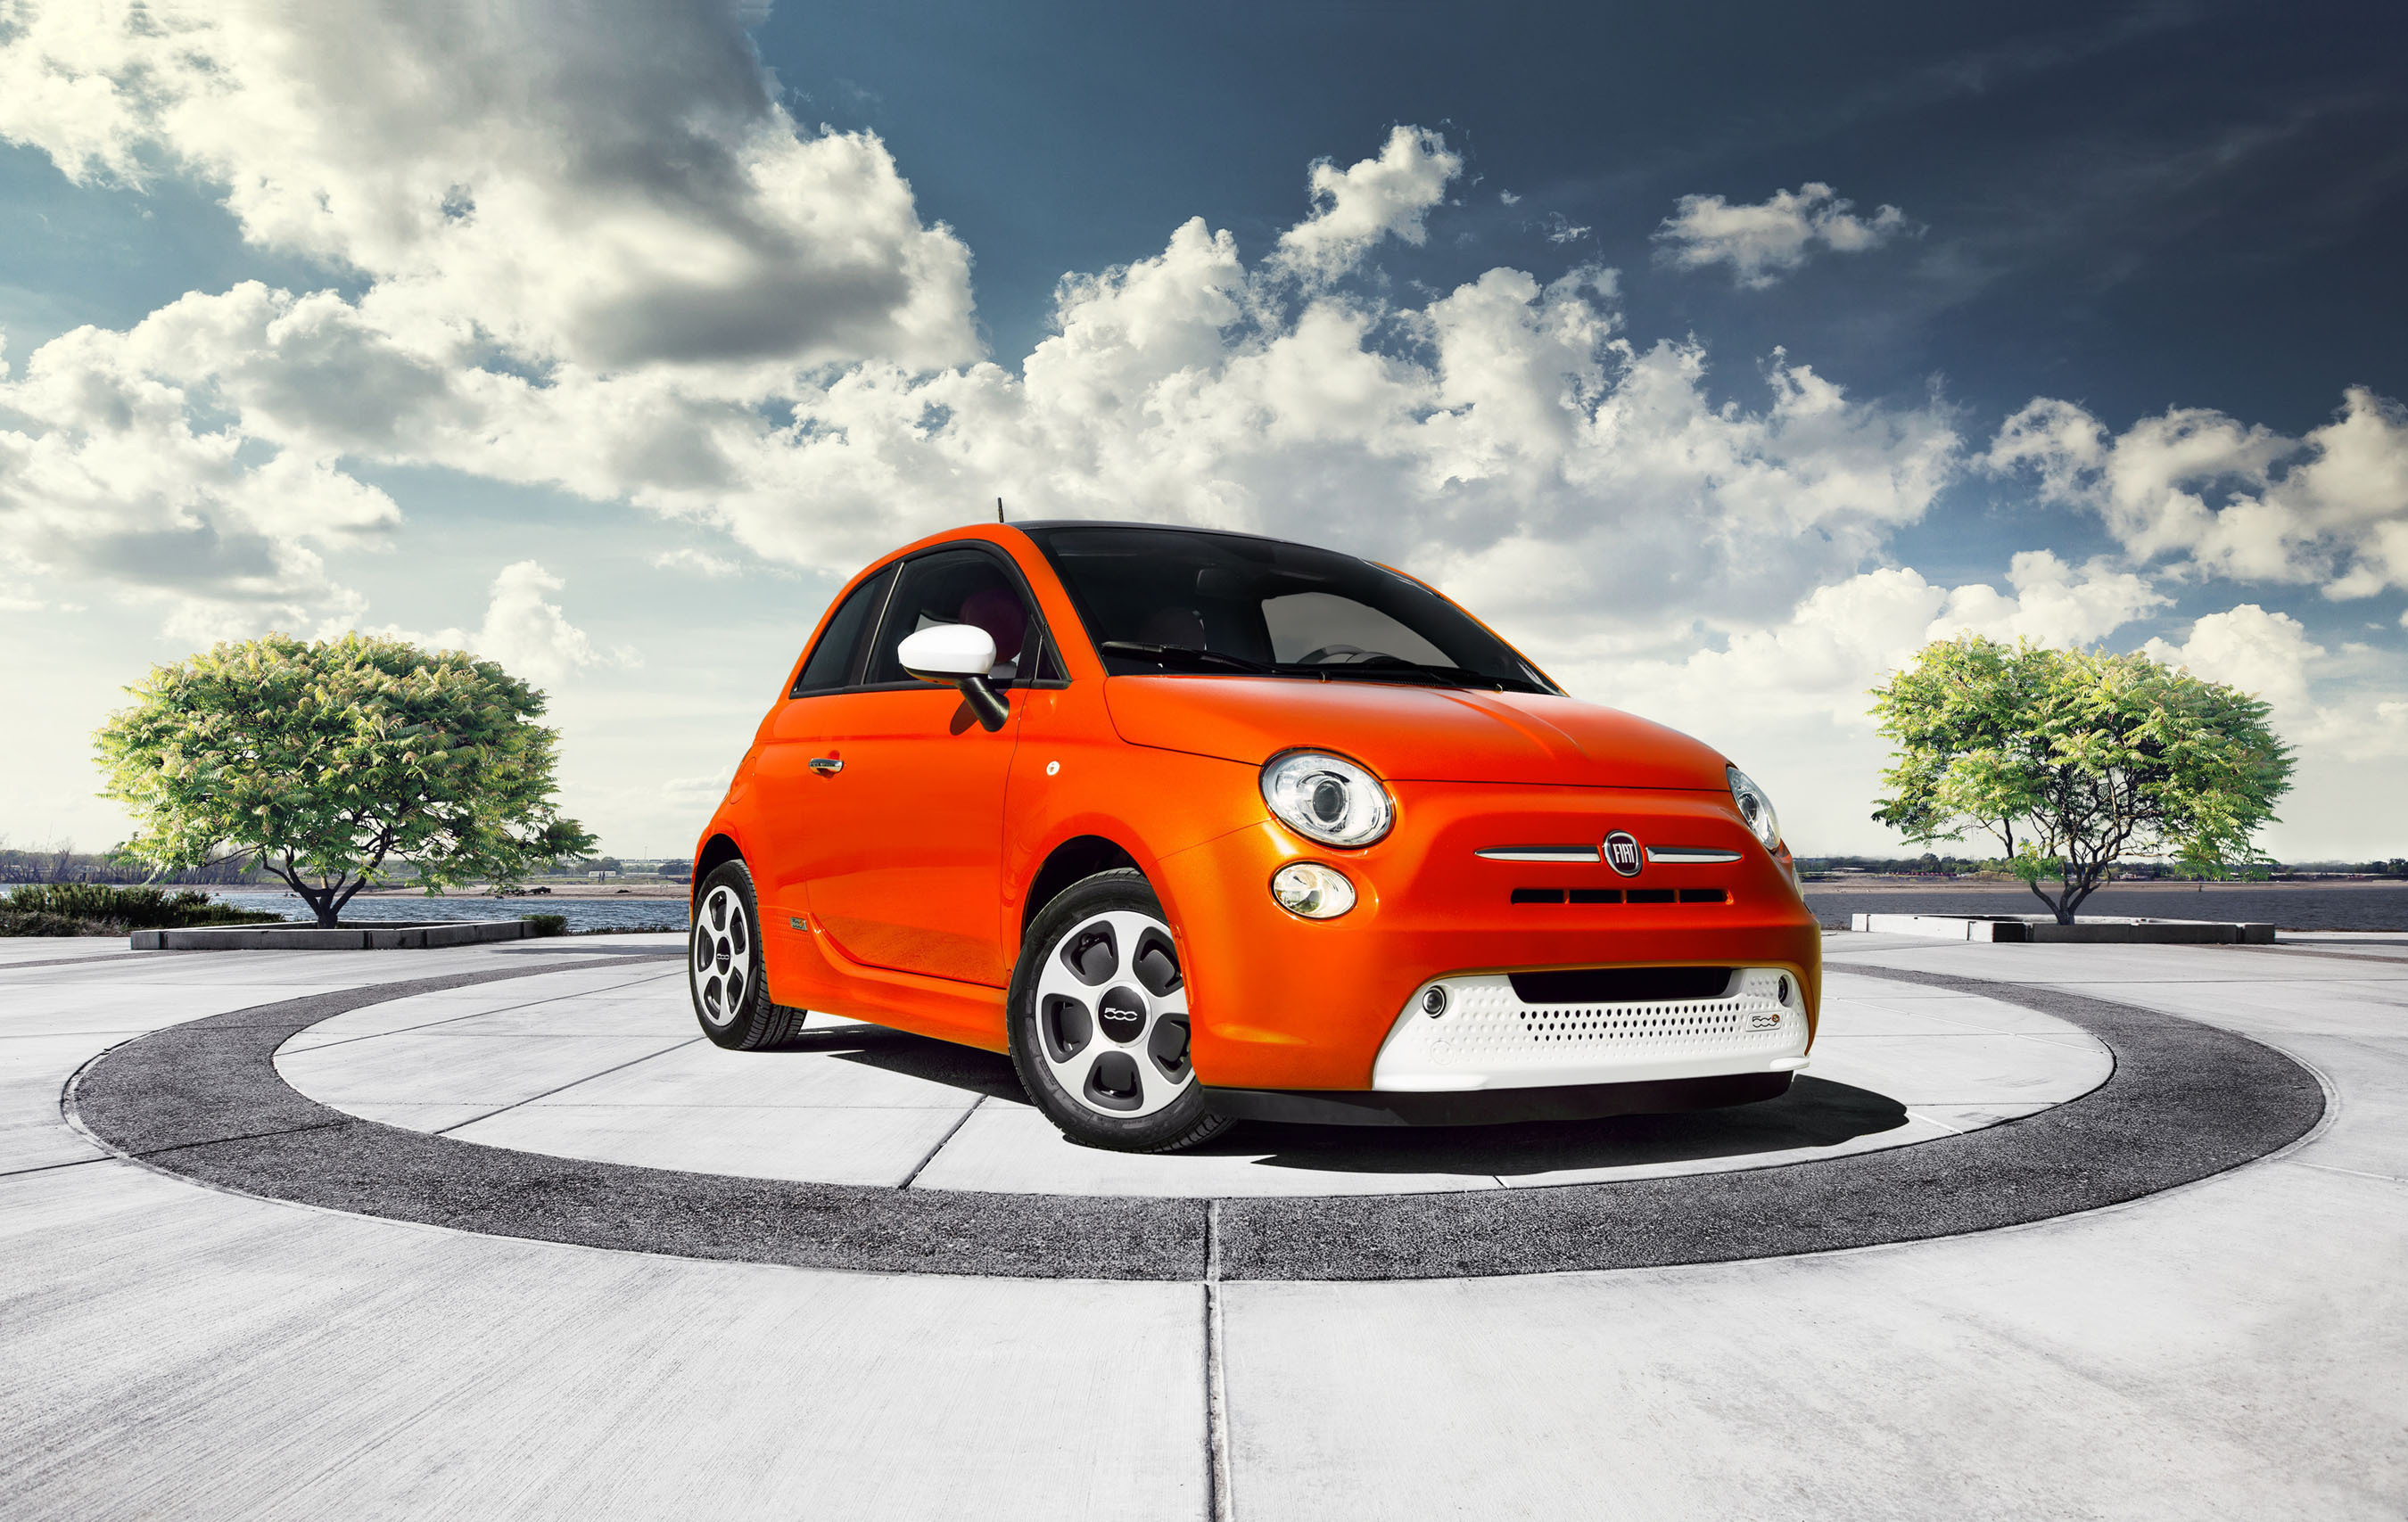 2013 Fiat 500e Offers Unsurpassed 108 Highway MPGe Rating and Class-Leading  87 Miles of Driving Range